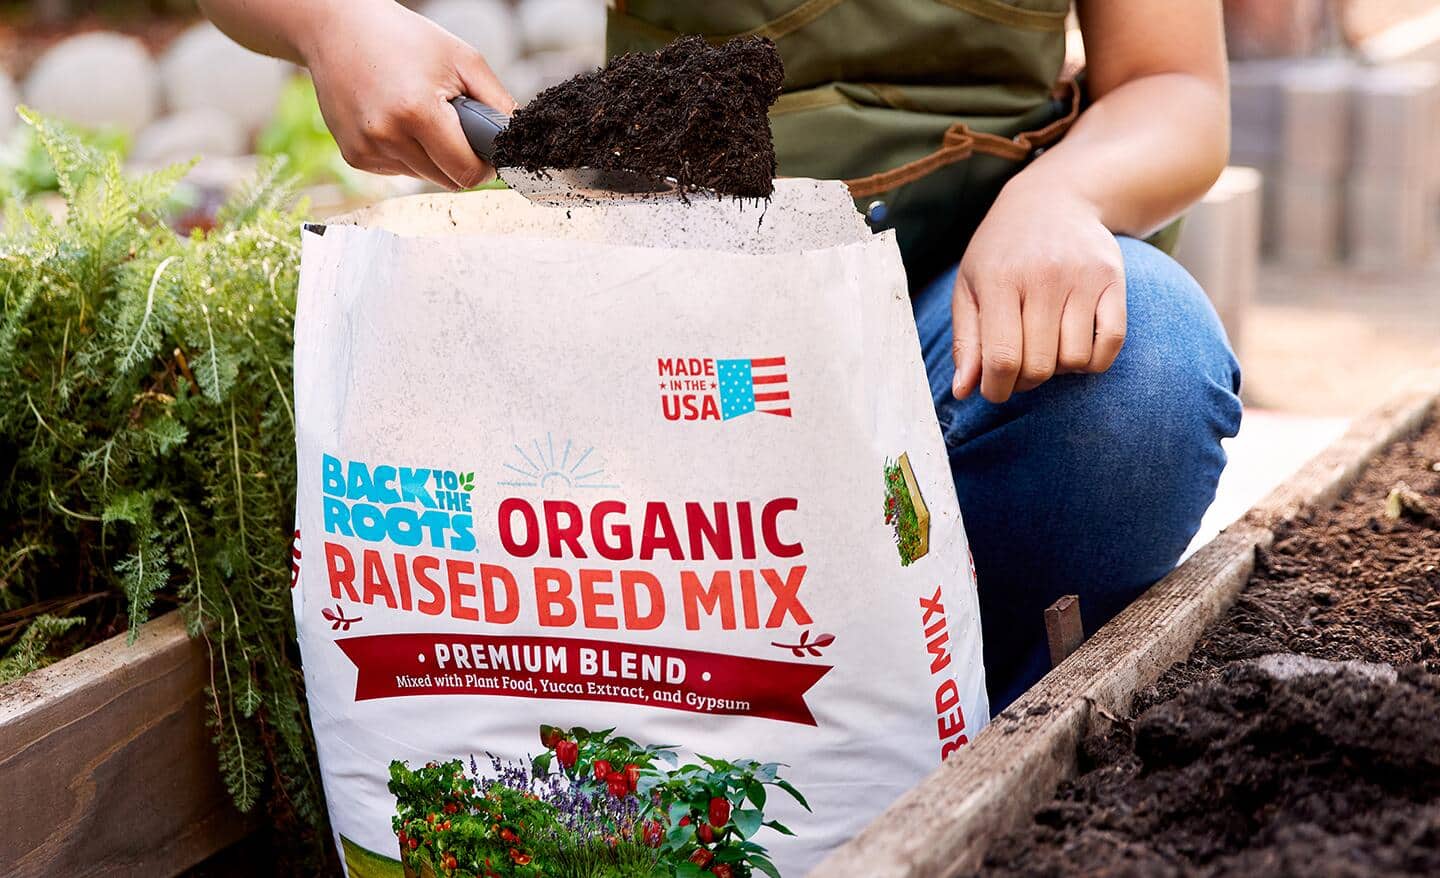 A gardener pulls a small shovel of raised bed soil out of a bag.